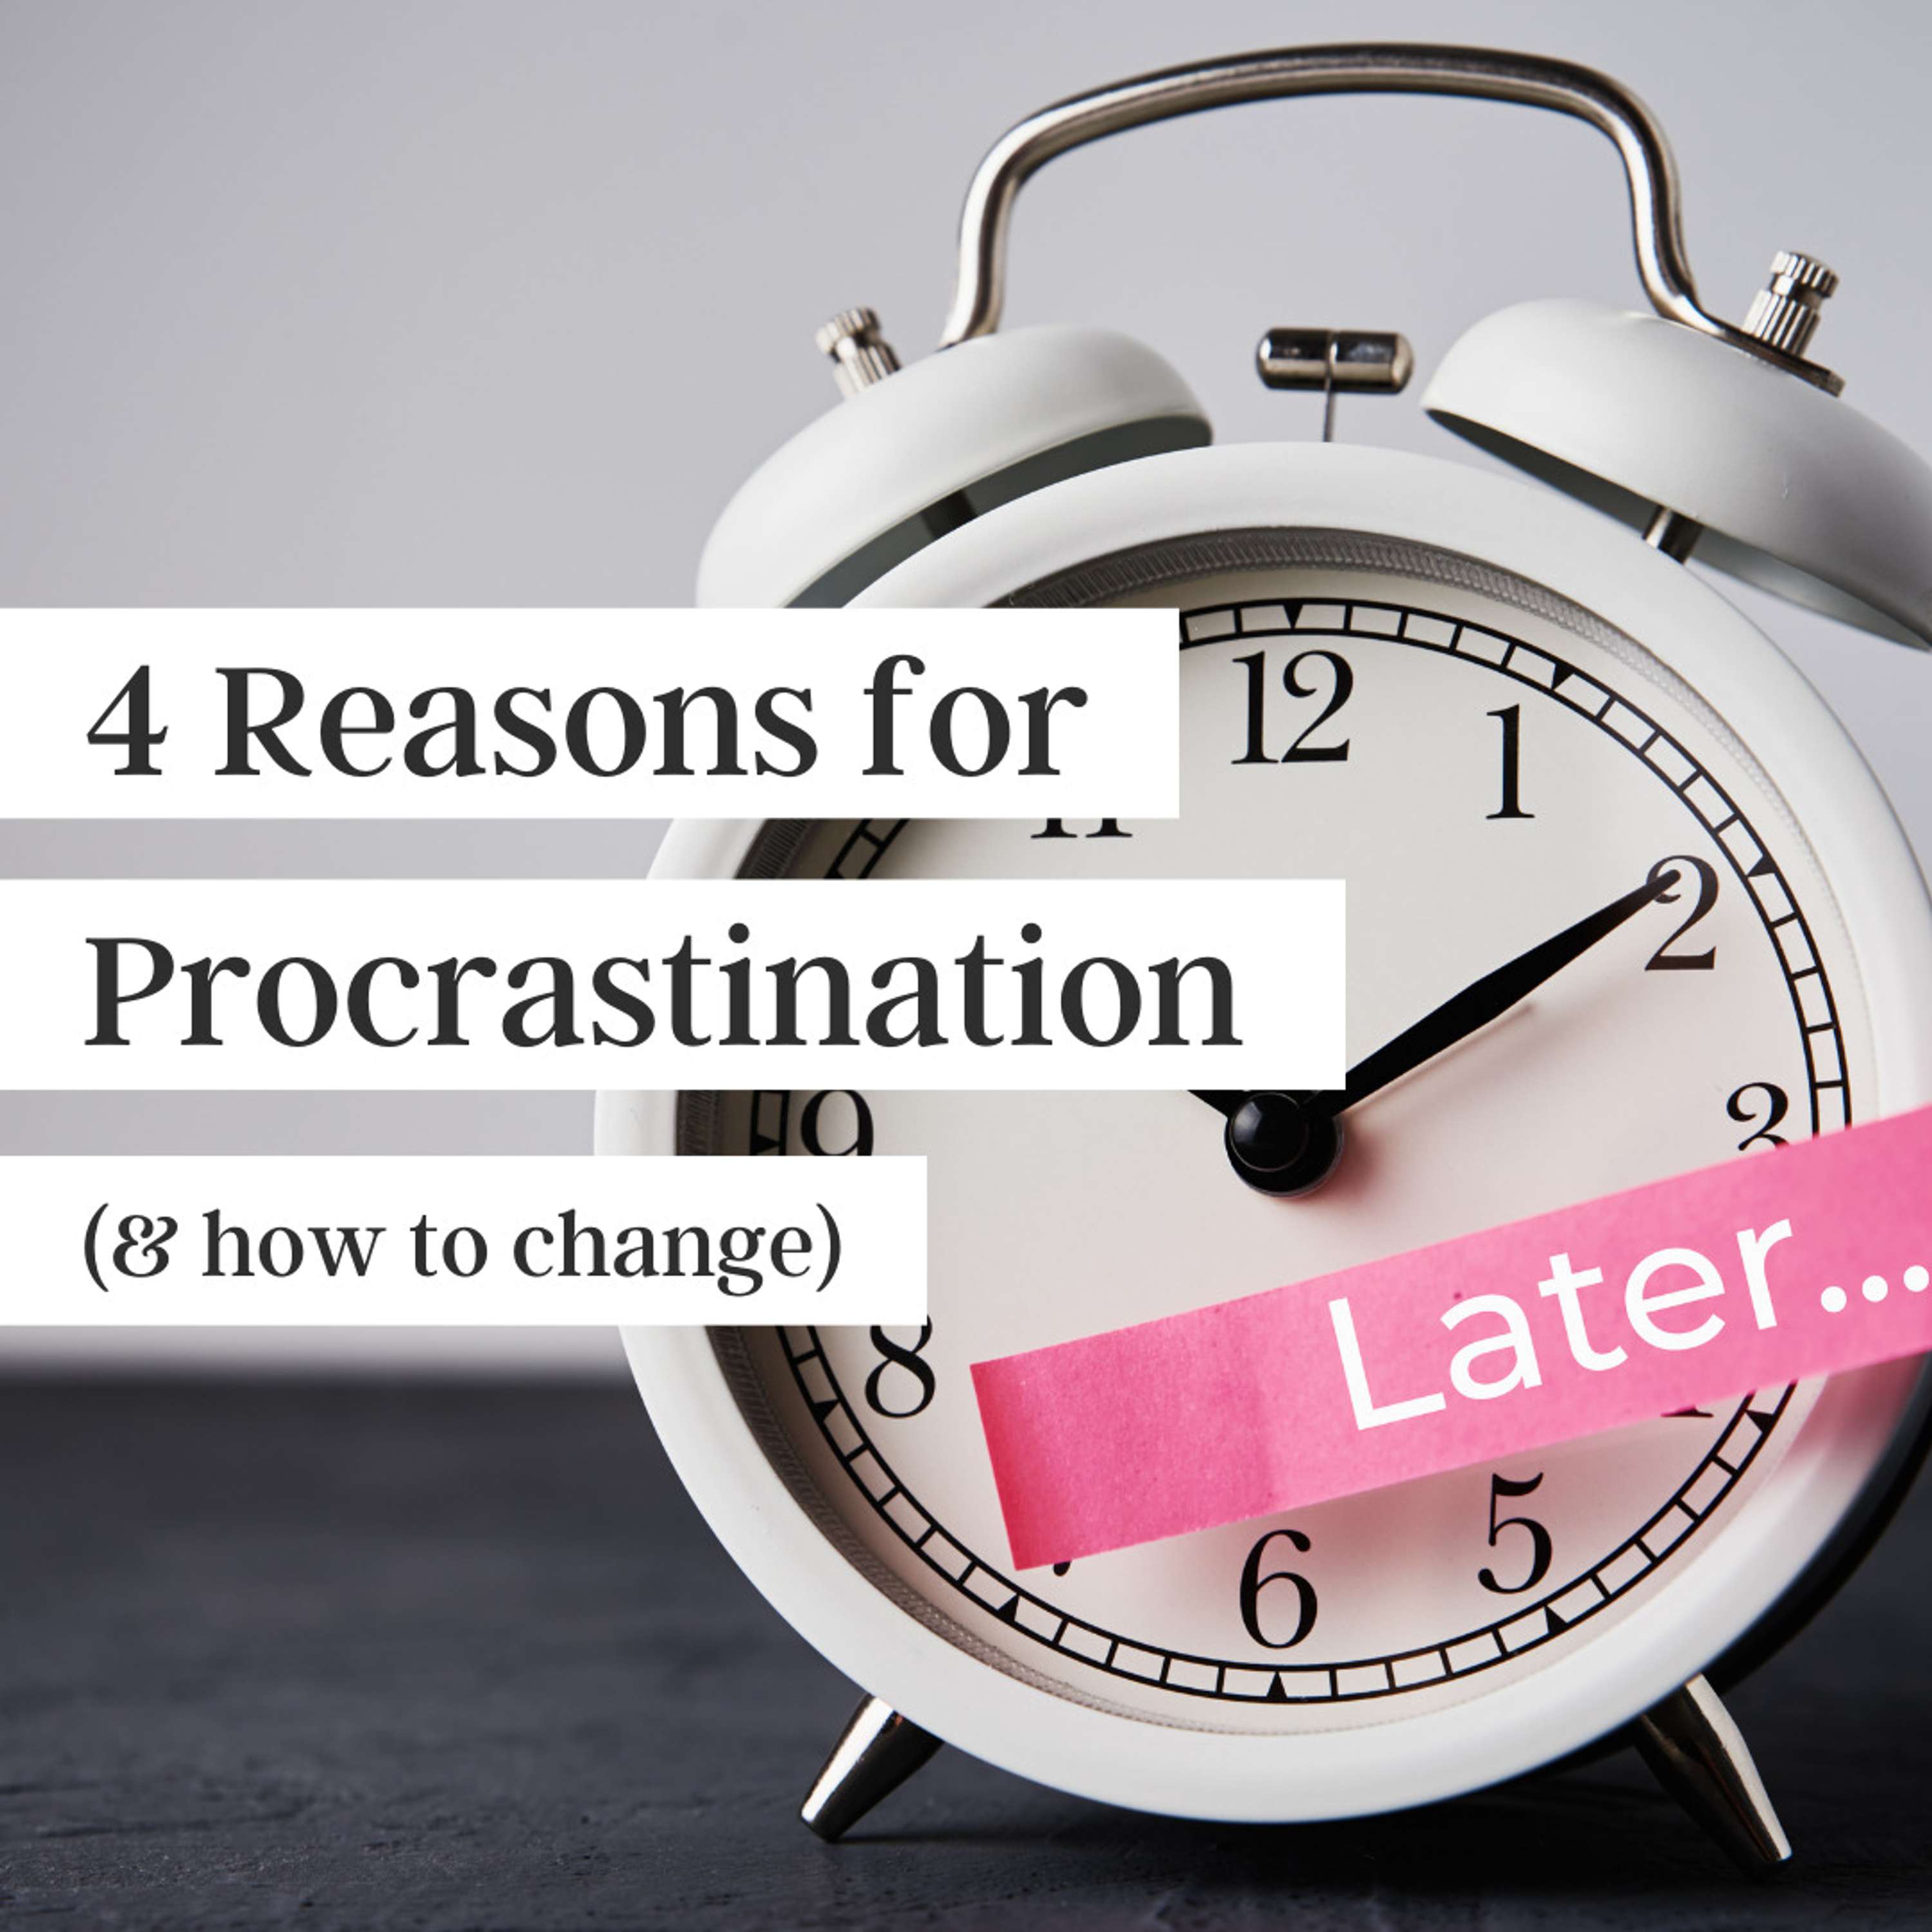 4 Reasons for Procrastination (and how to manage them)